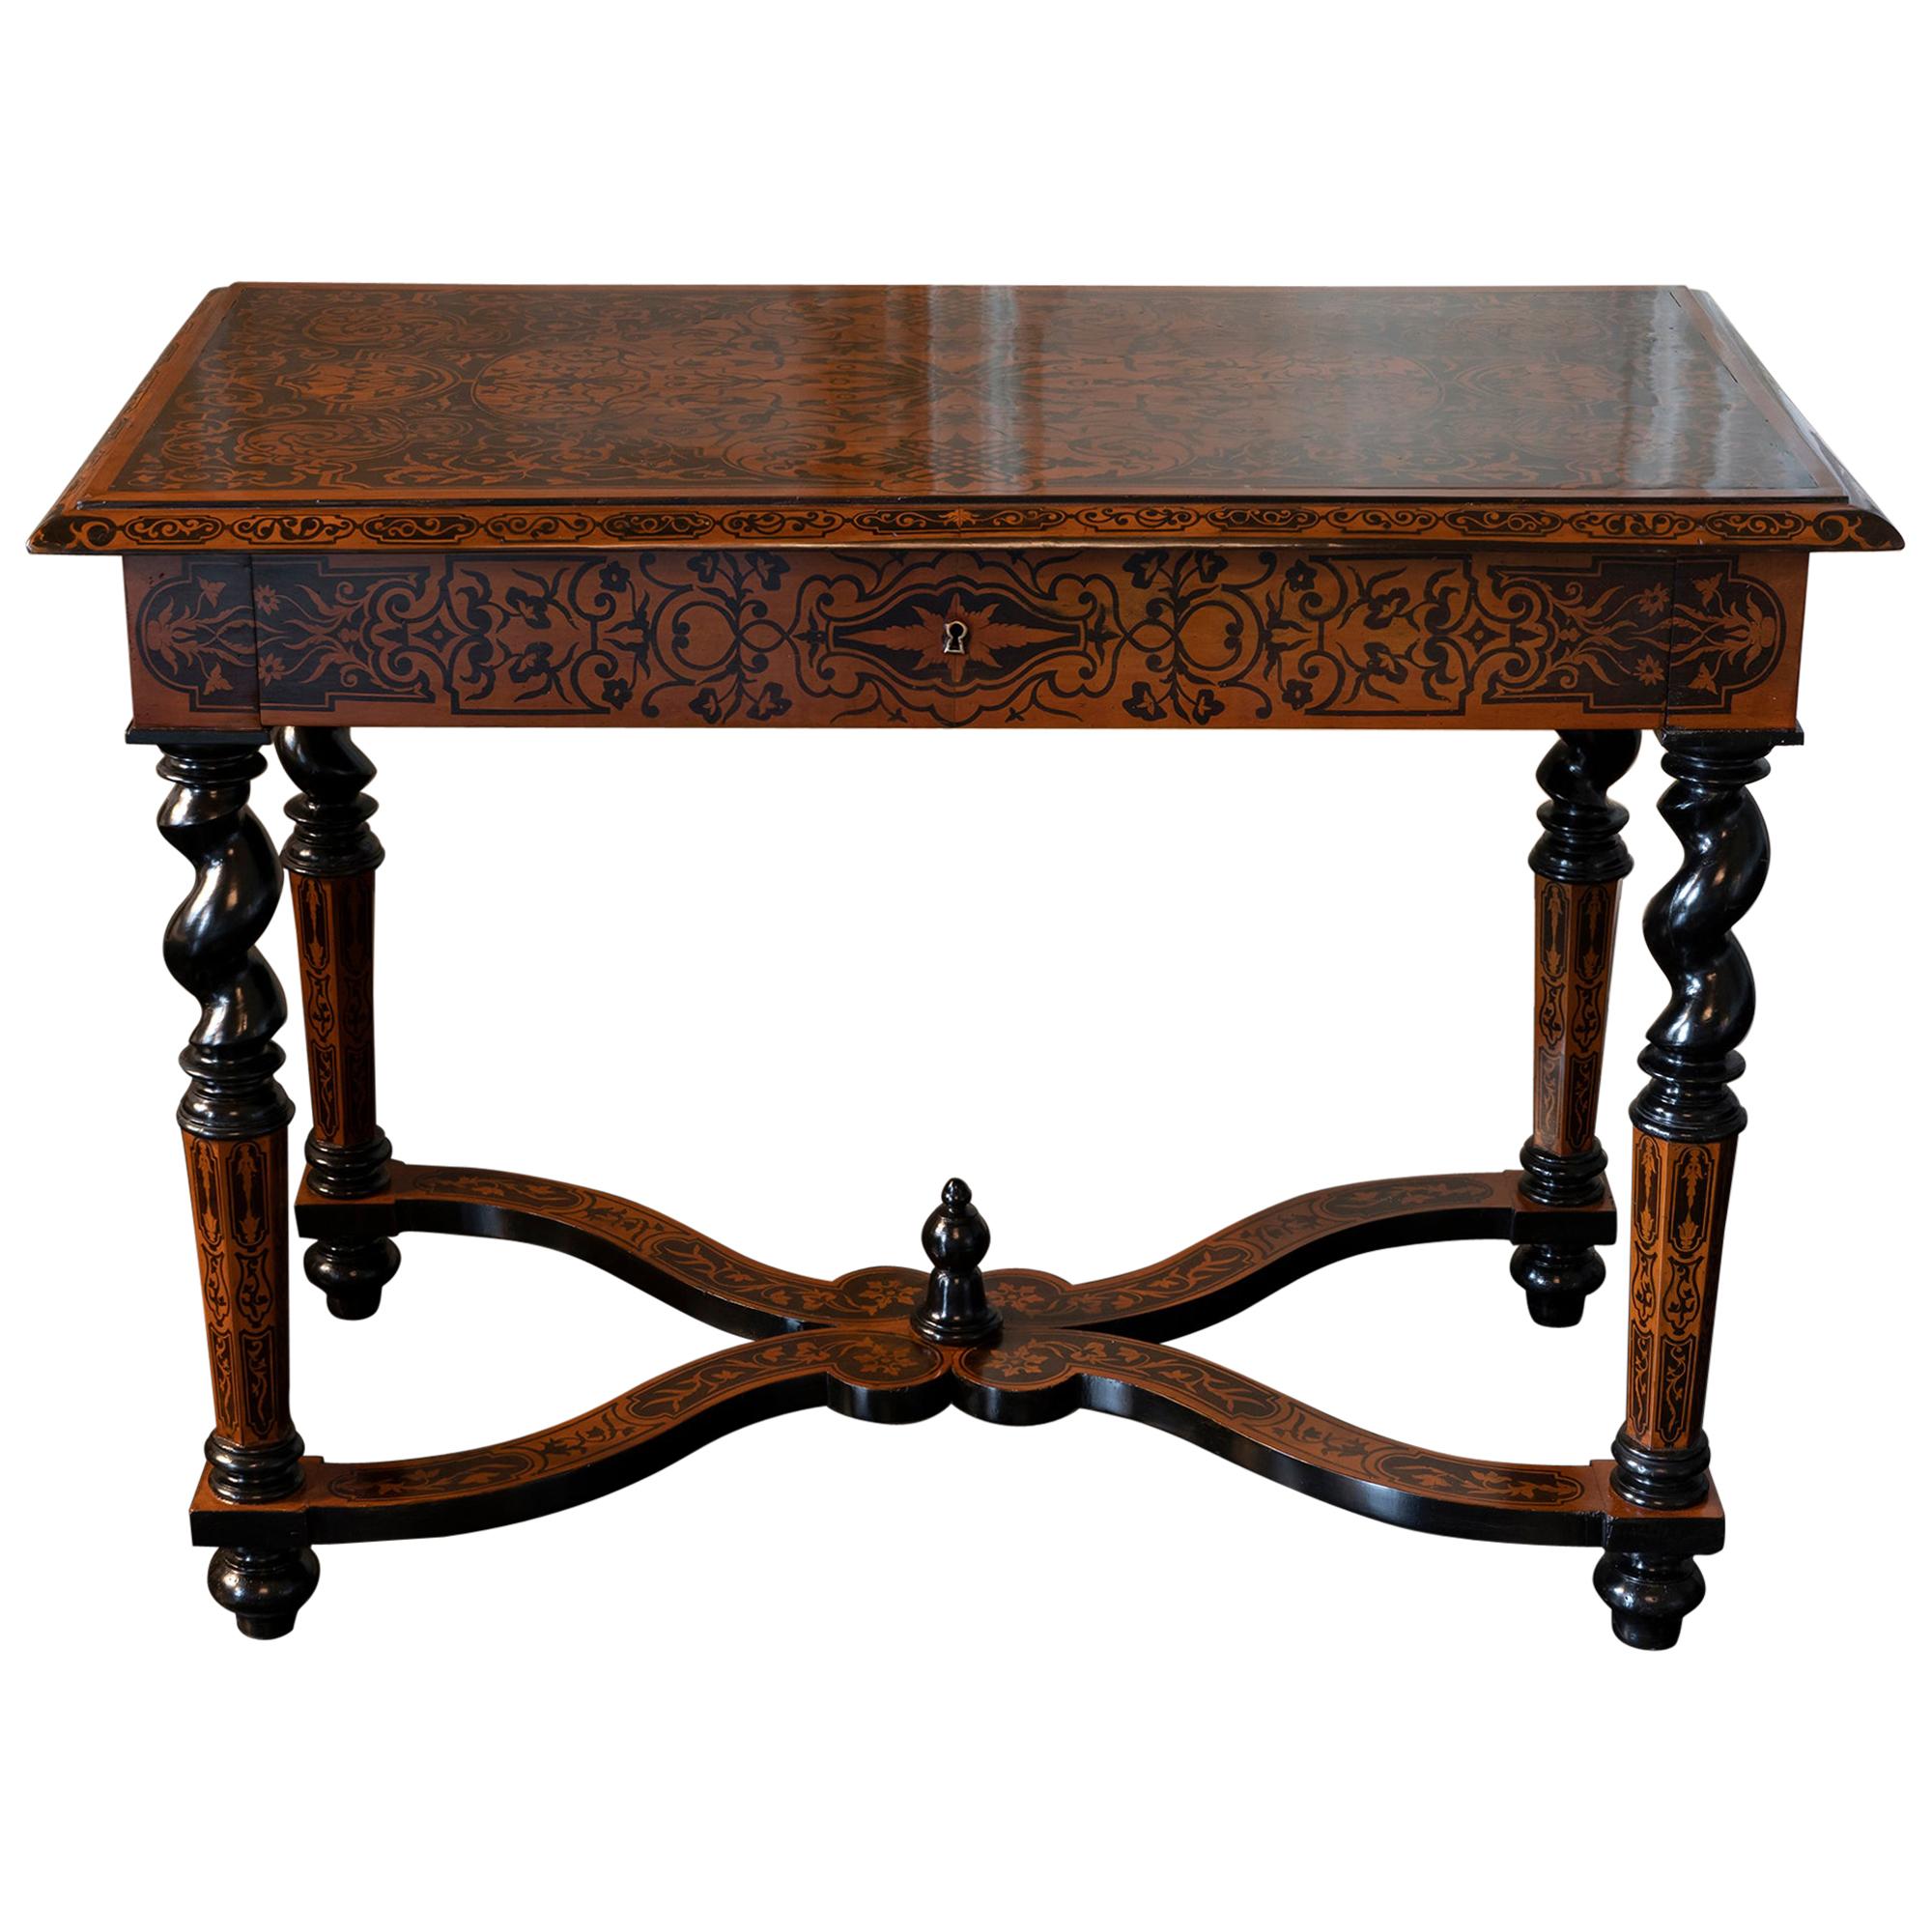 Mid-19th Century Walnut Inlaid Floral Marquetry French Writing Table